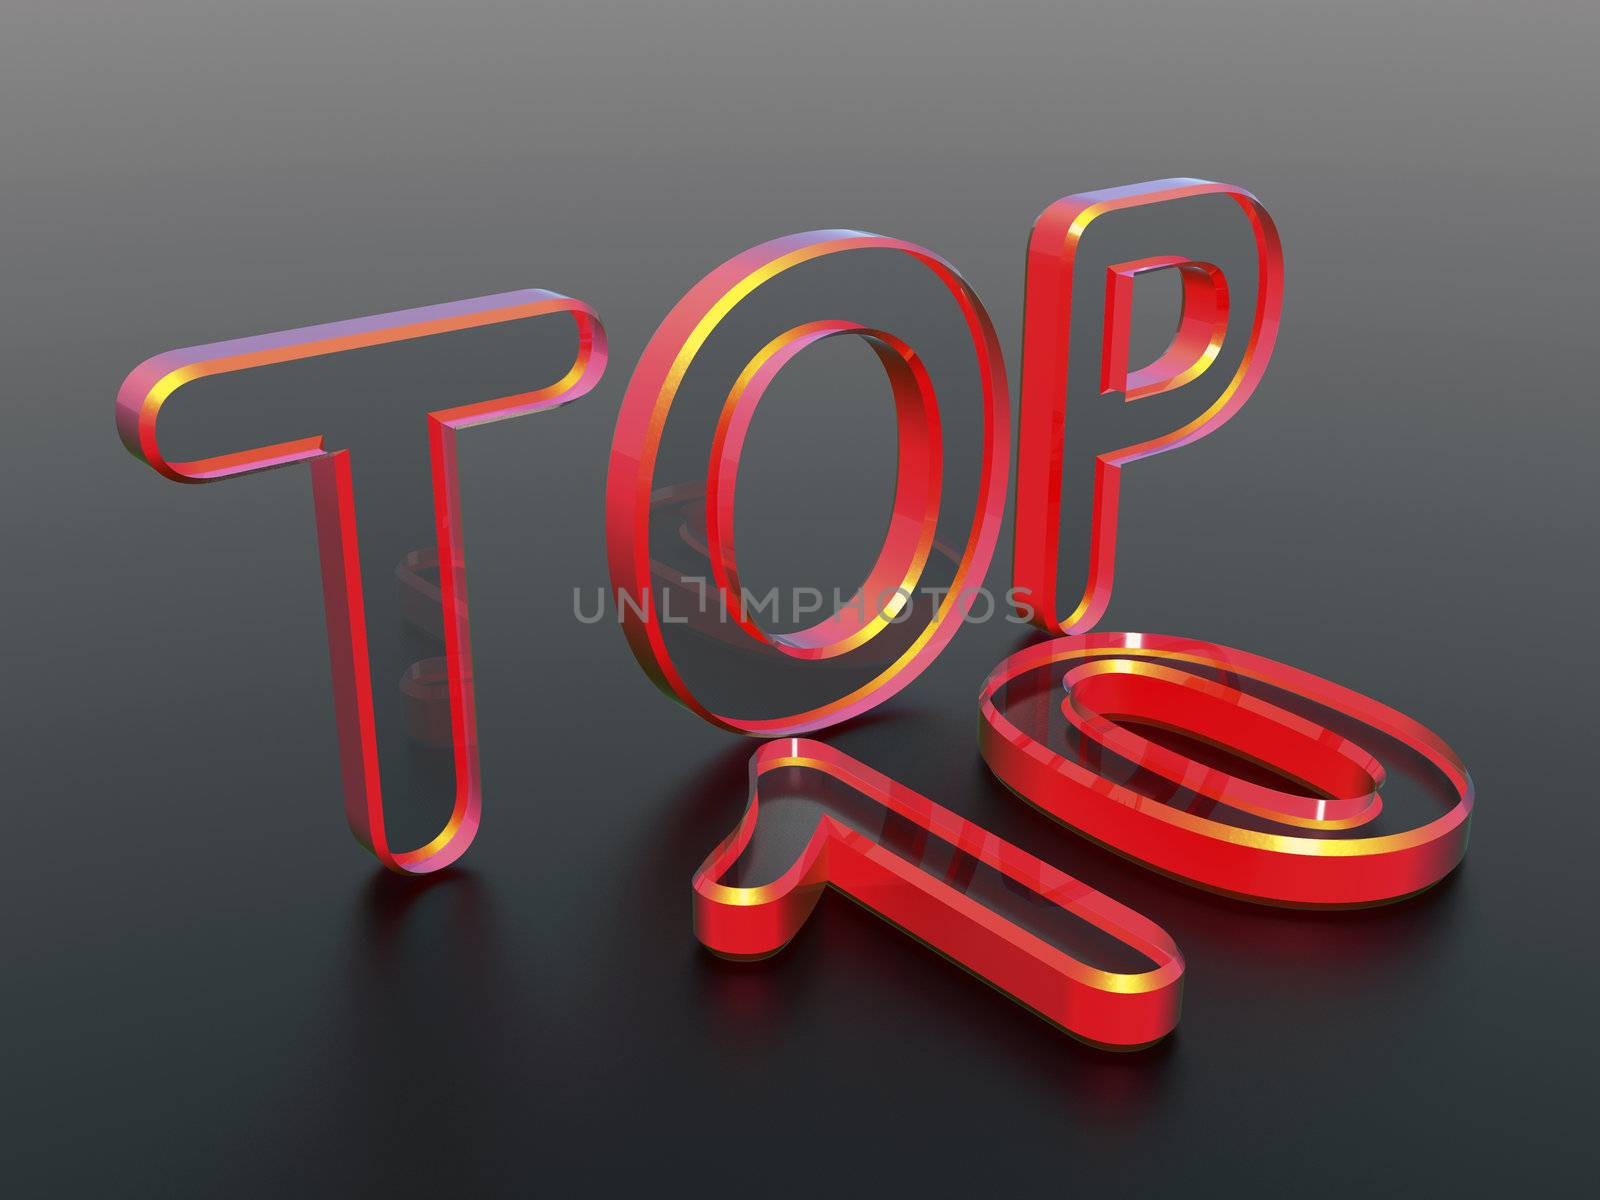 TOP 10 by magraphics